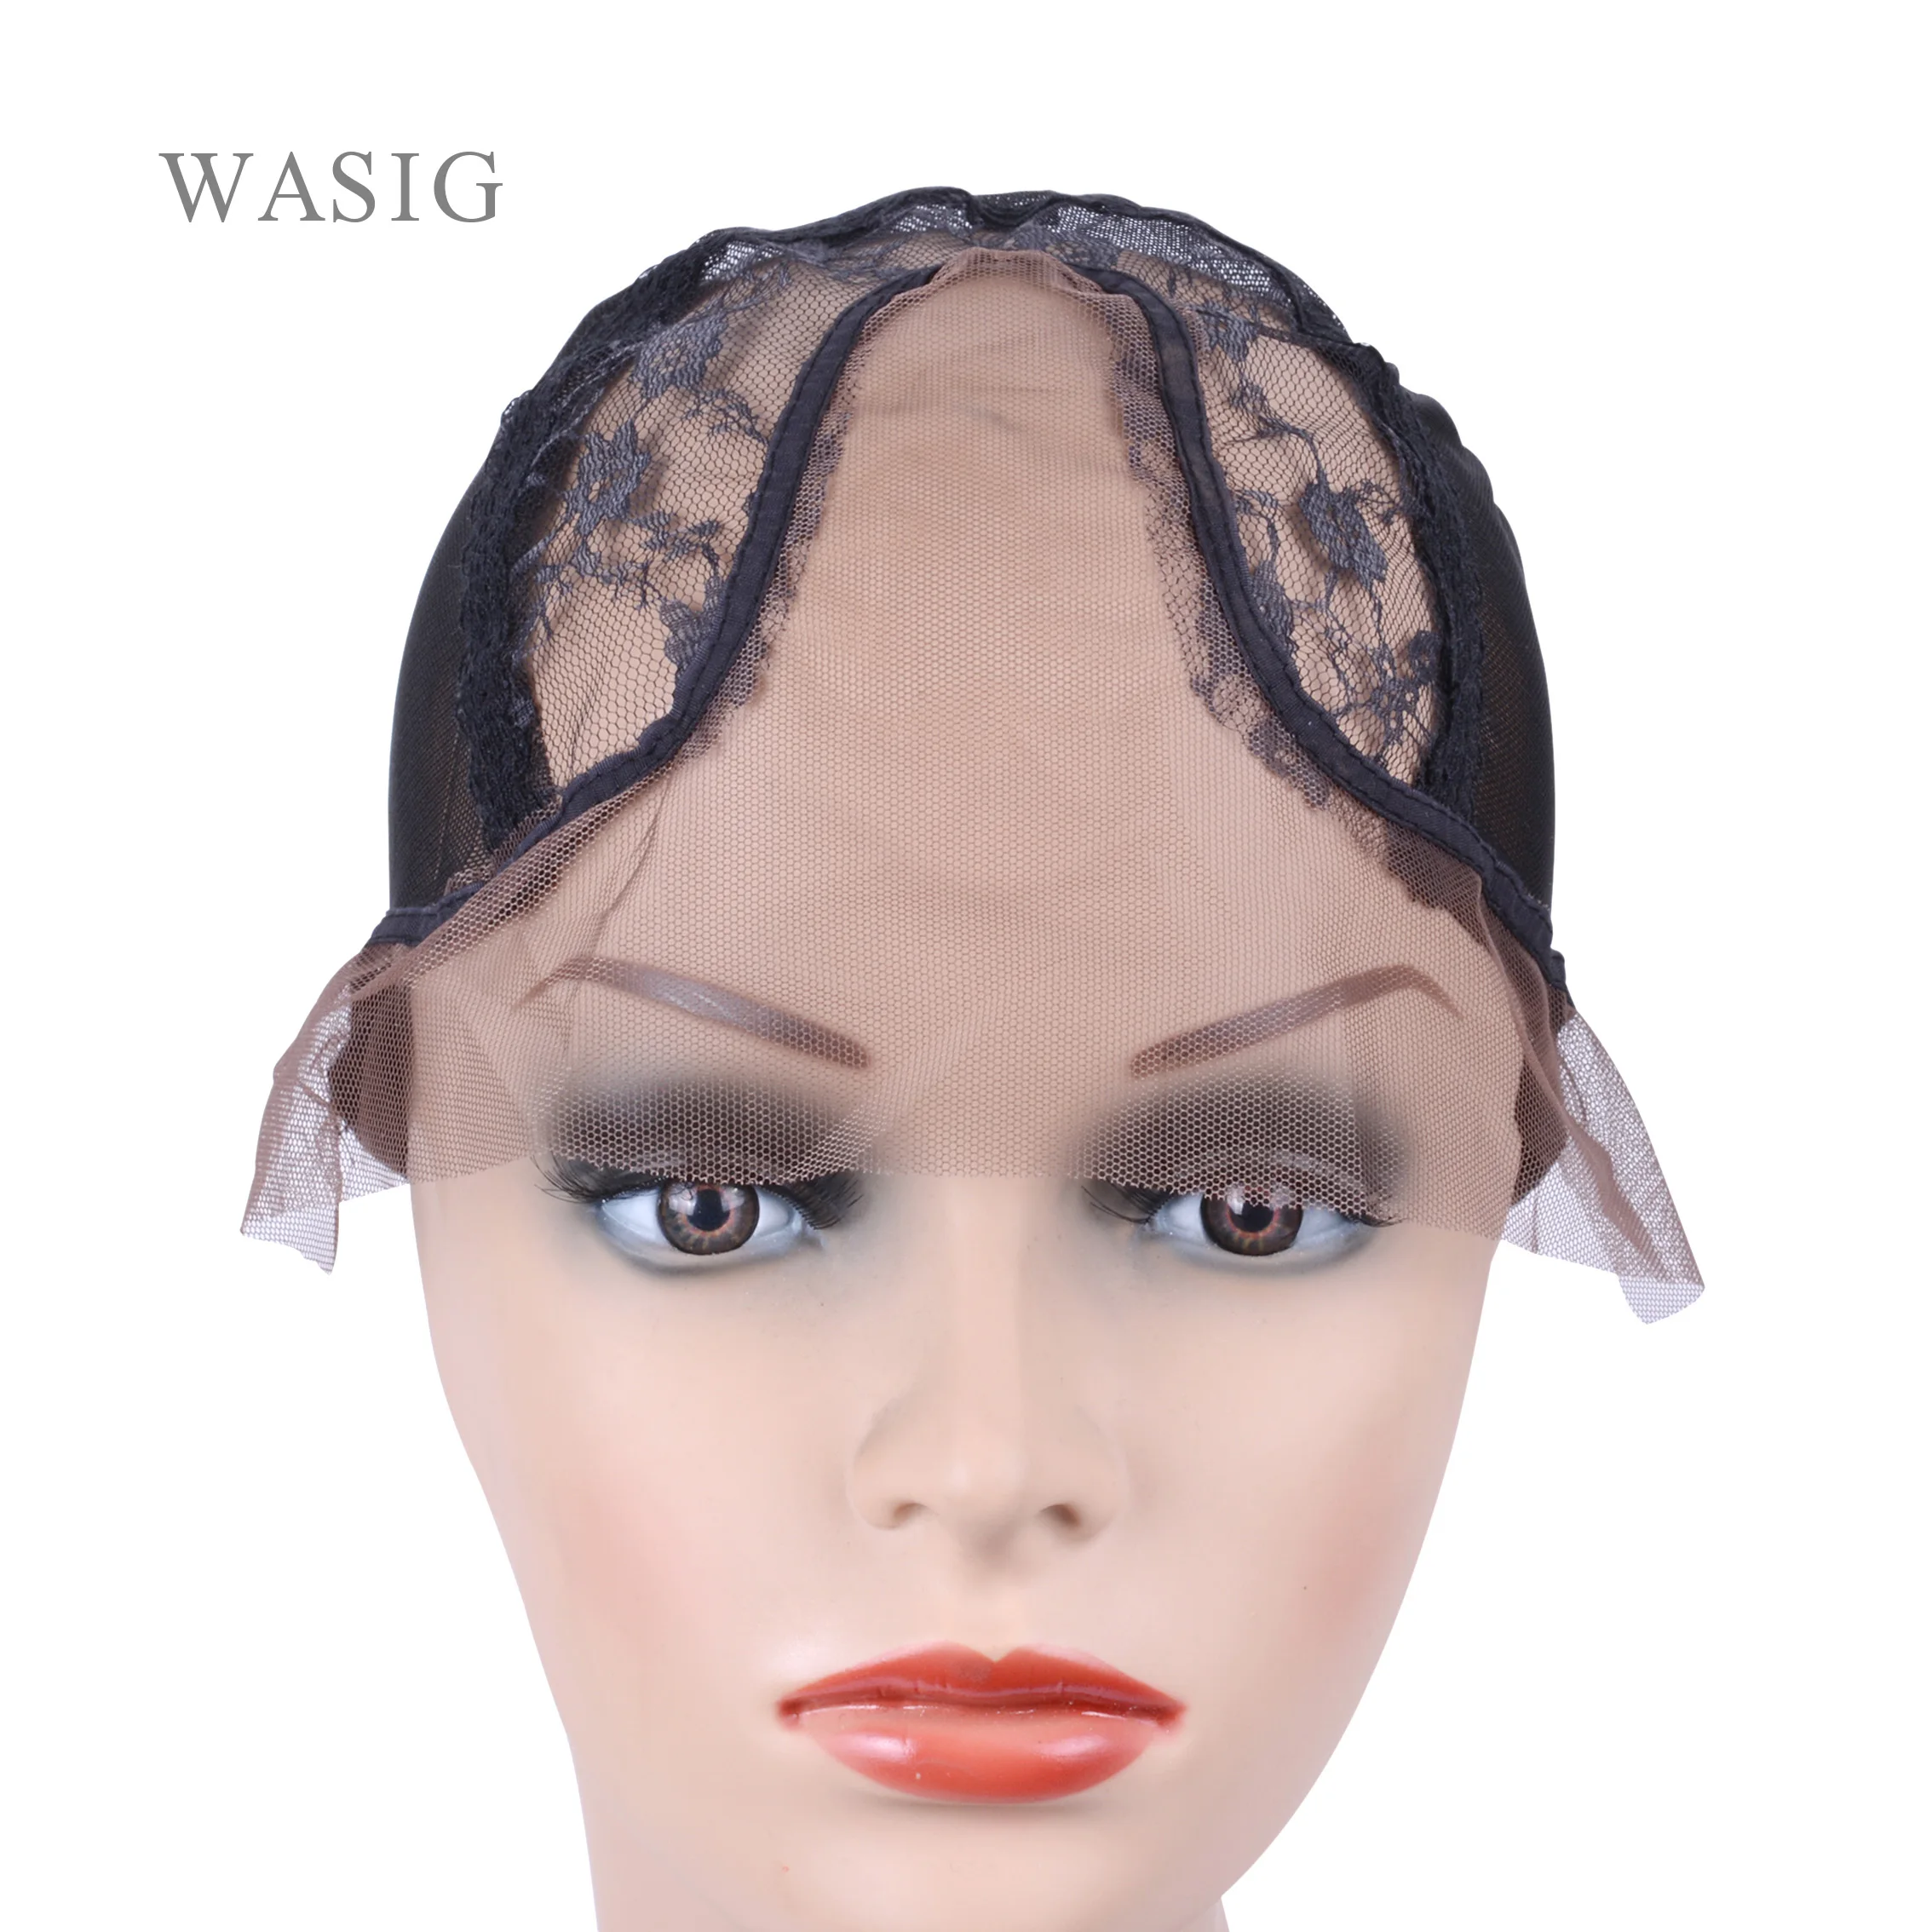 Lace-Wig-Cap Making-Wigs Elastic-Strap Swiss Hairnets Back-Mesh Part for with on The